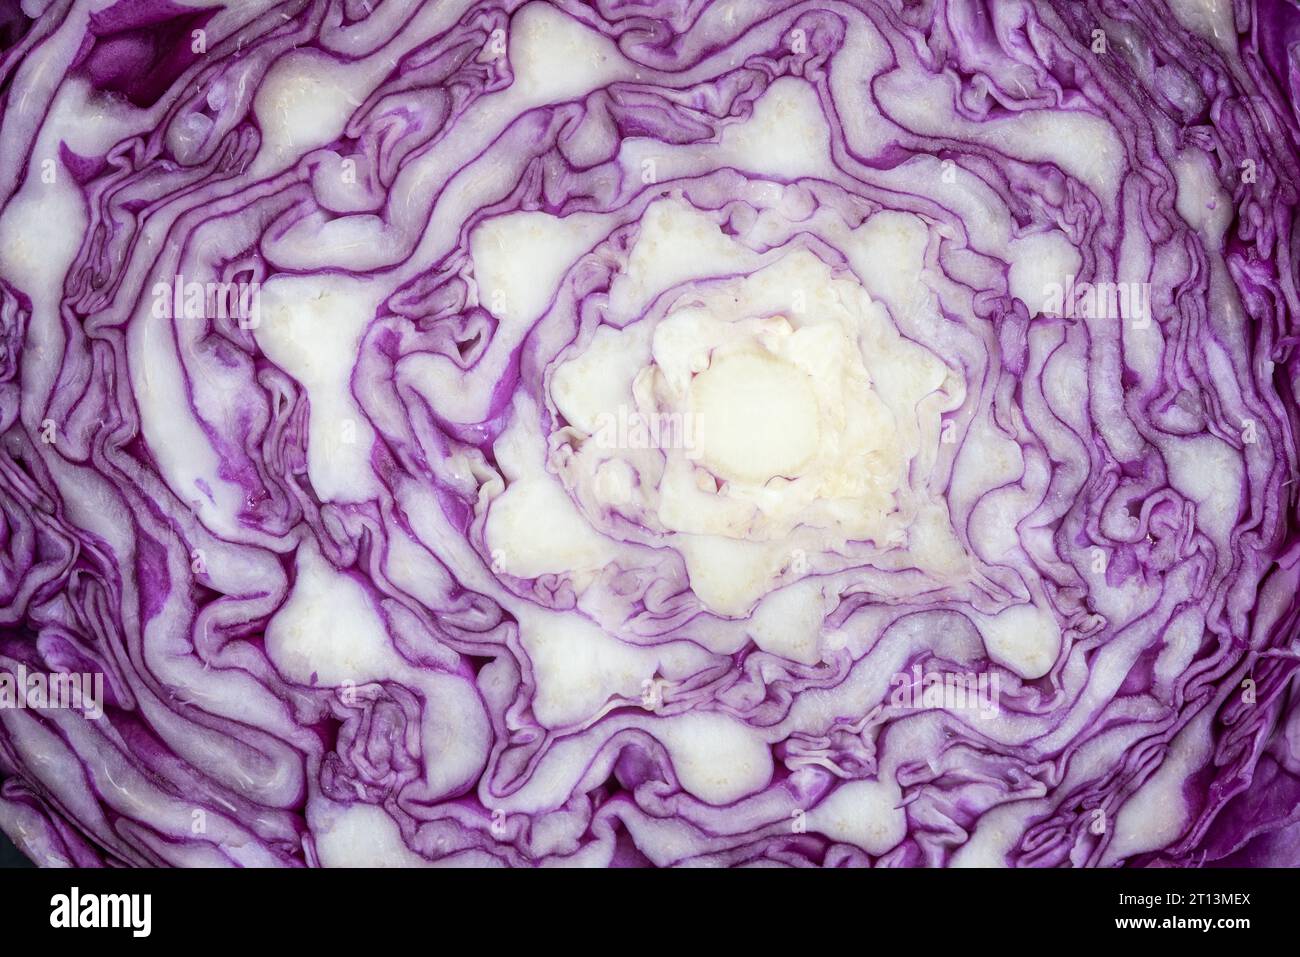 Cross section of a purple cabbage. Stock Photo